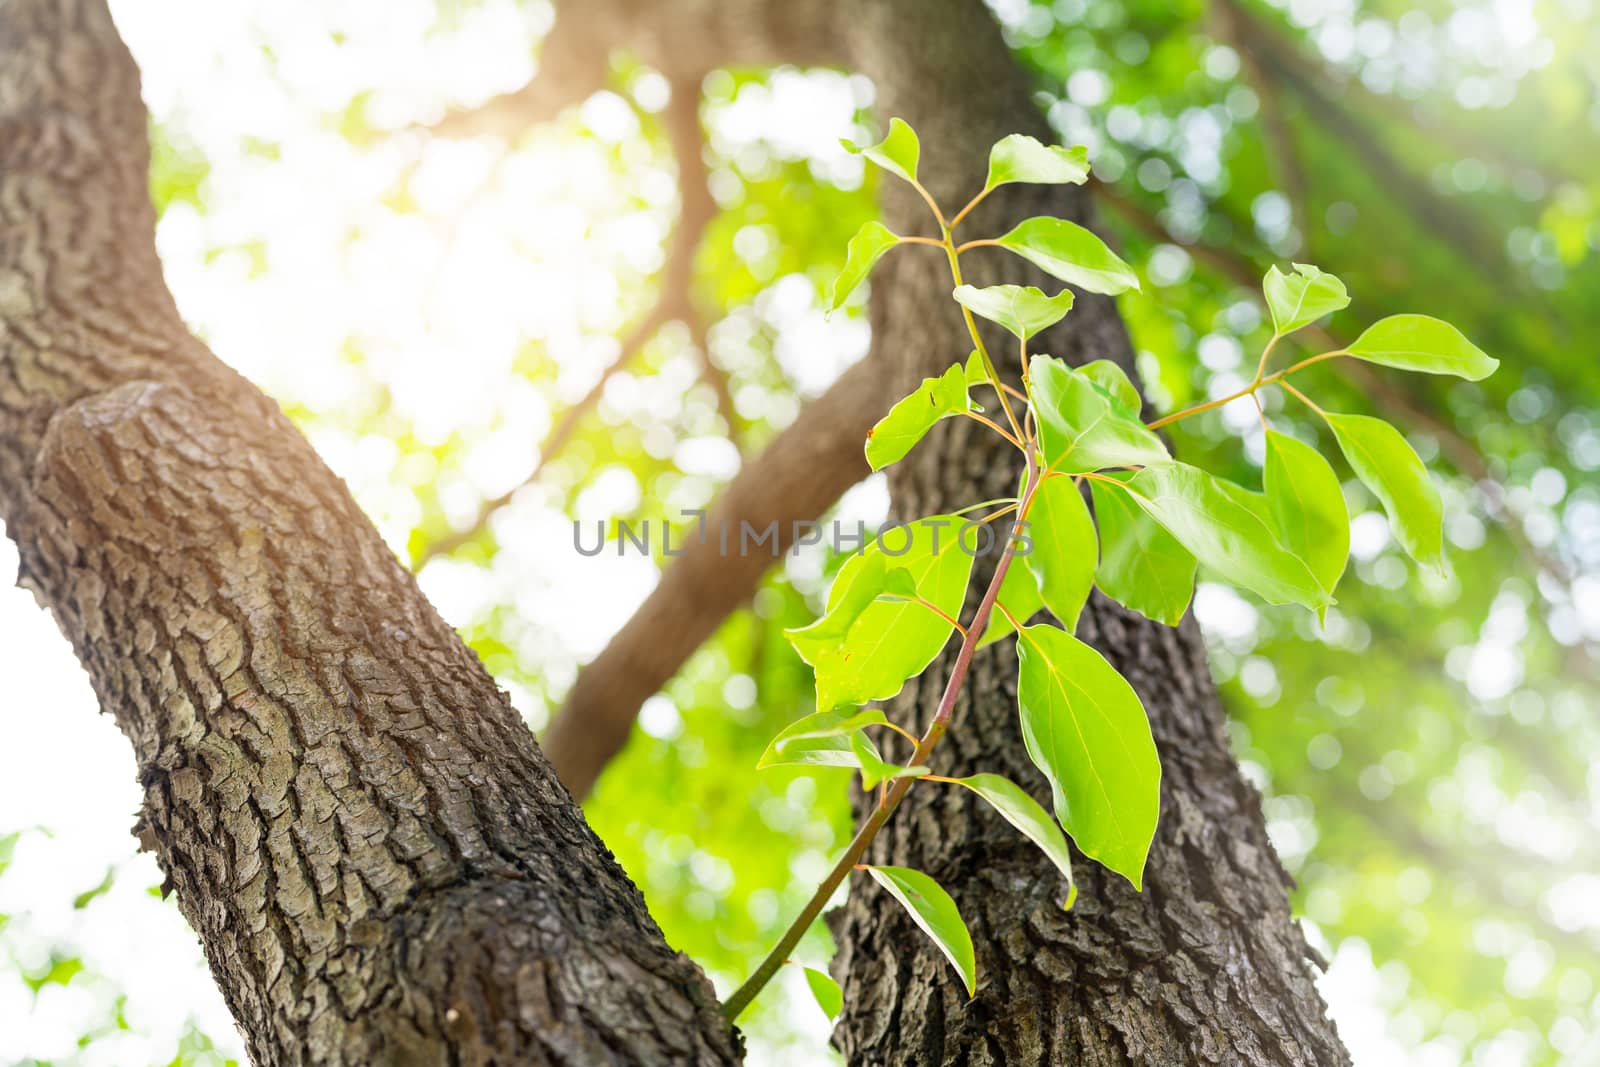 new life, new born green leave growth on the old tree, summer co by psodaz